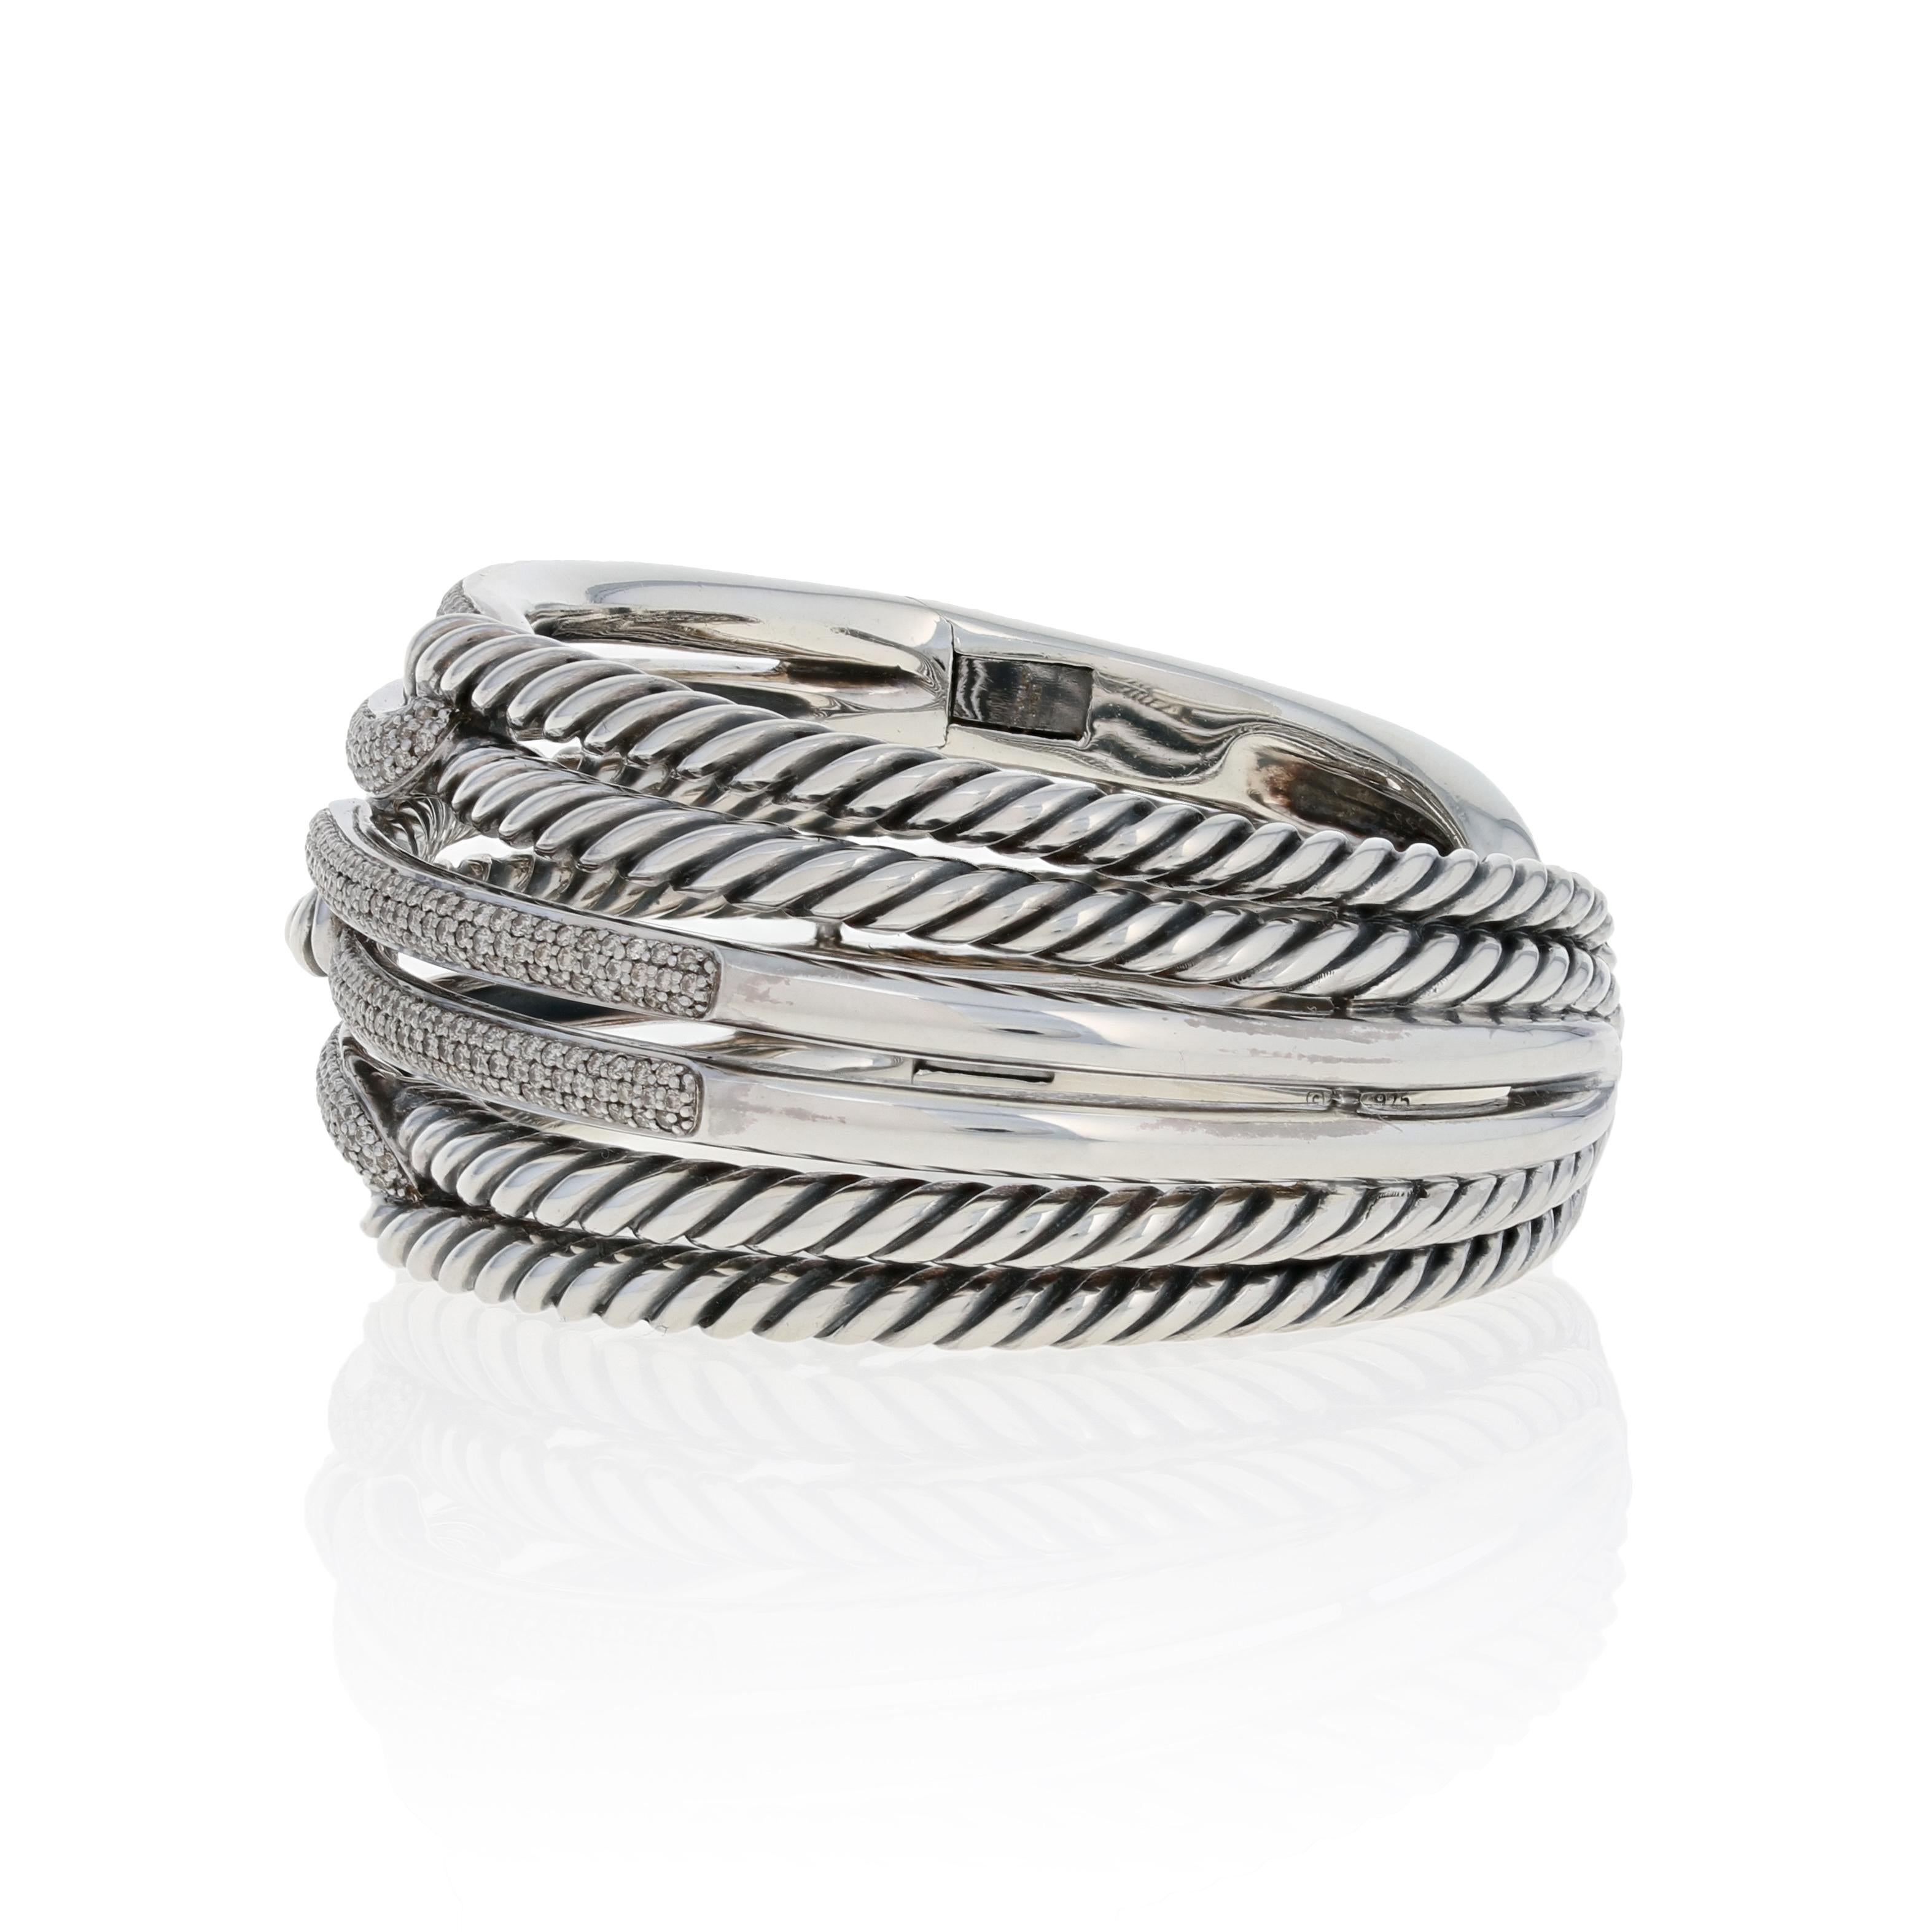 Originally retailing for $8500, this exquisite designer bracelet is being offered here for a much more wallet-friendly price. A signature David Yurman drawstring pouch accompanies this piece. 

Brand: David Yurman 
Collection: Labyrinth 

Metal